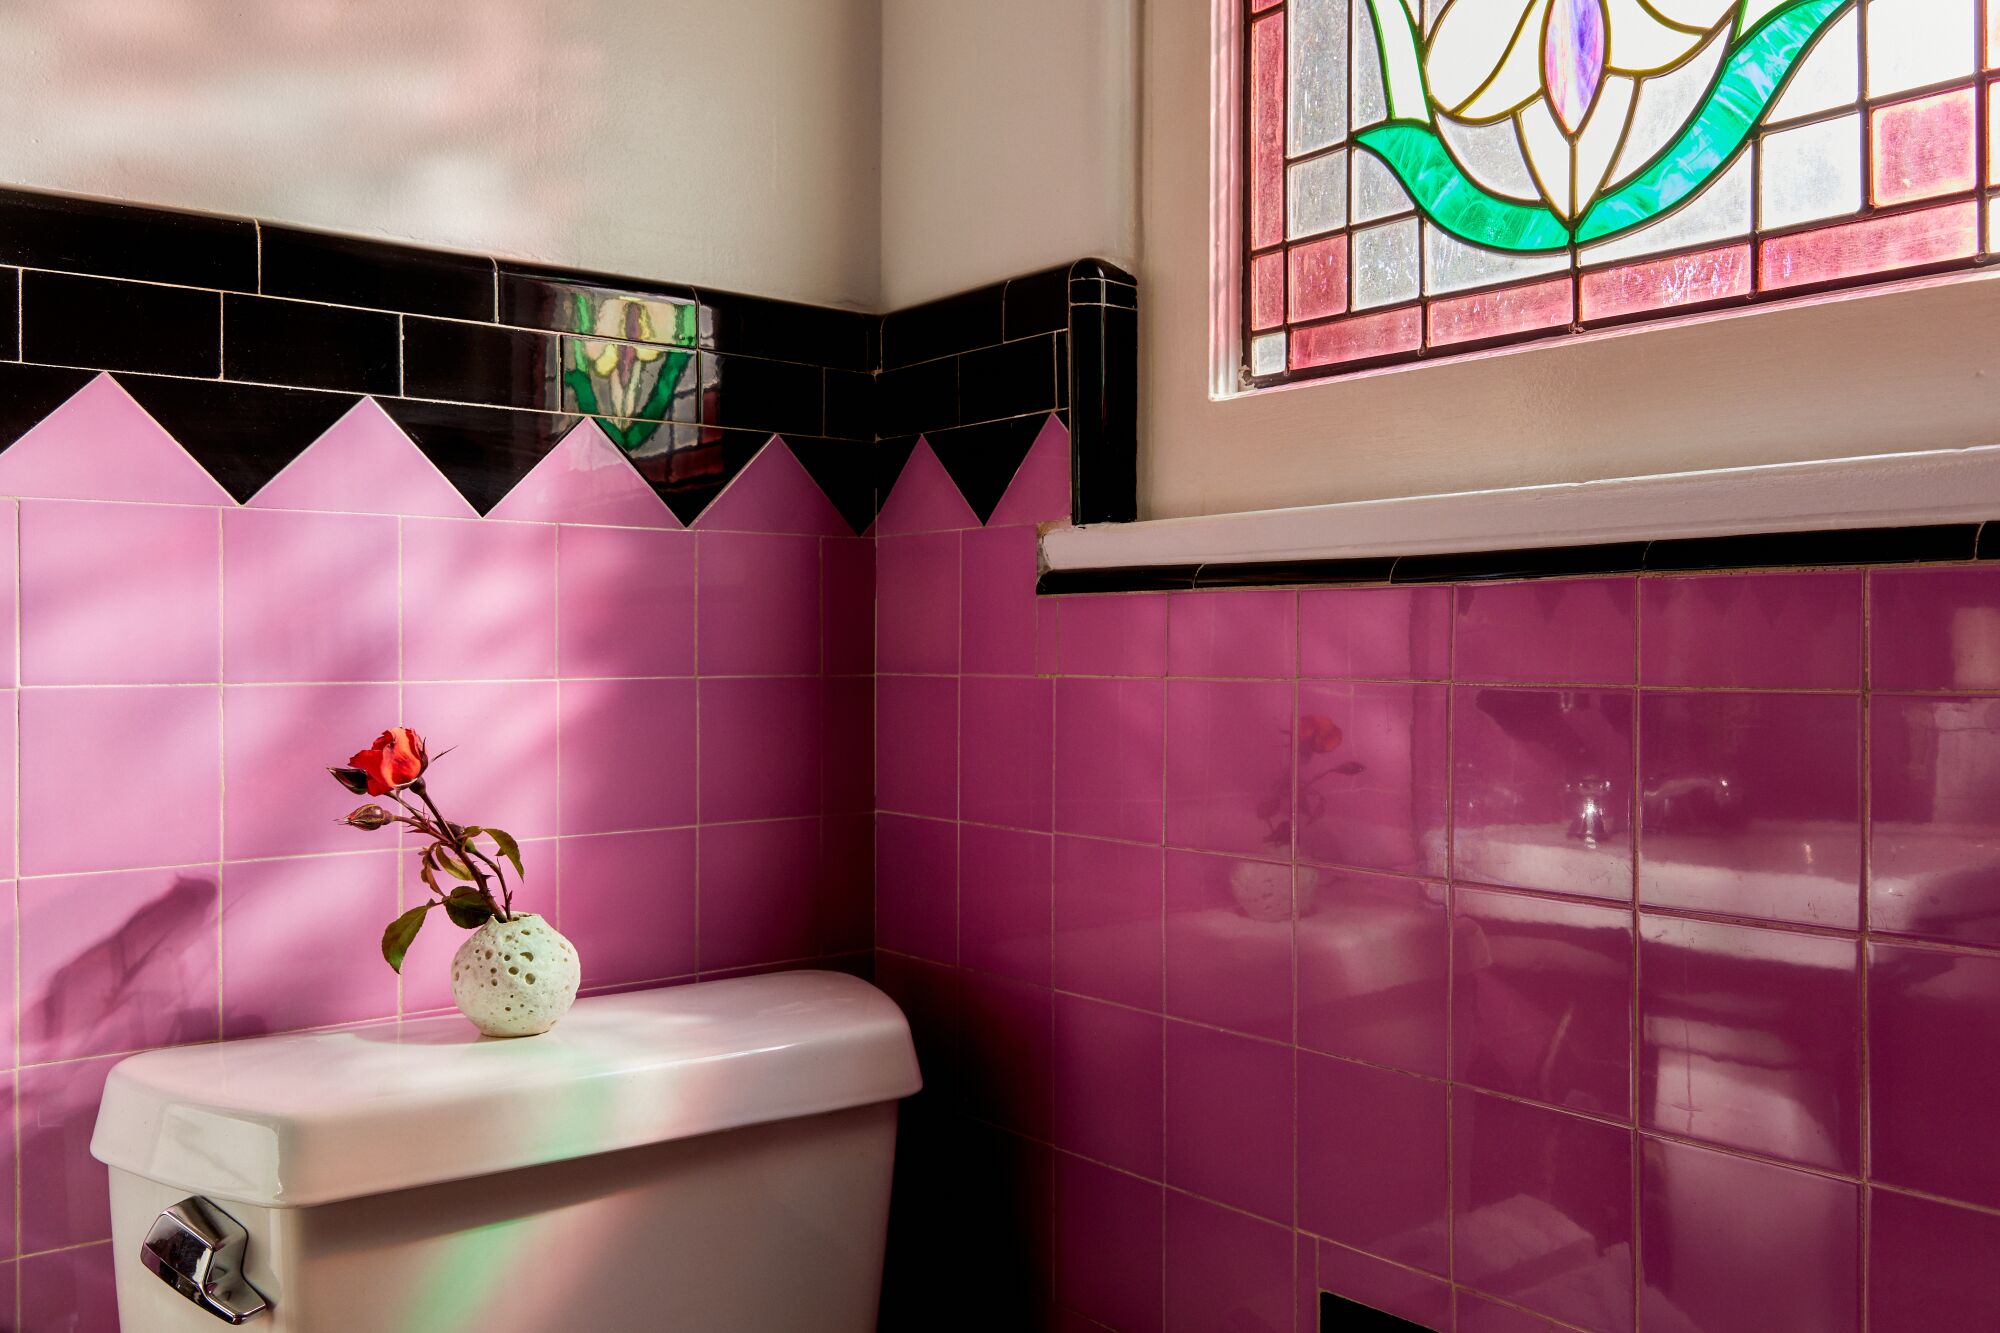 Vintage Bathroom Tile Ideas Styling Your Bathroom For An Era Gone By 26543